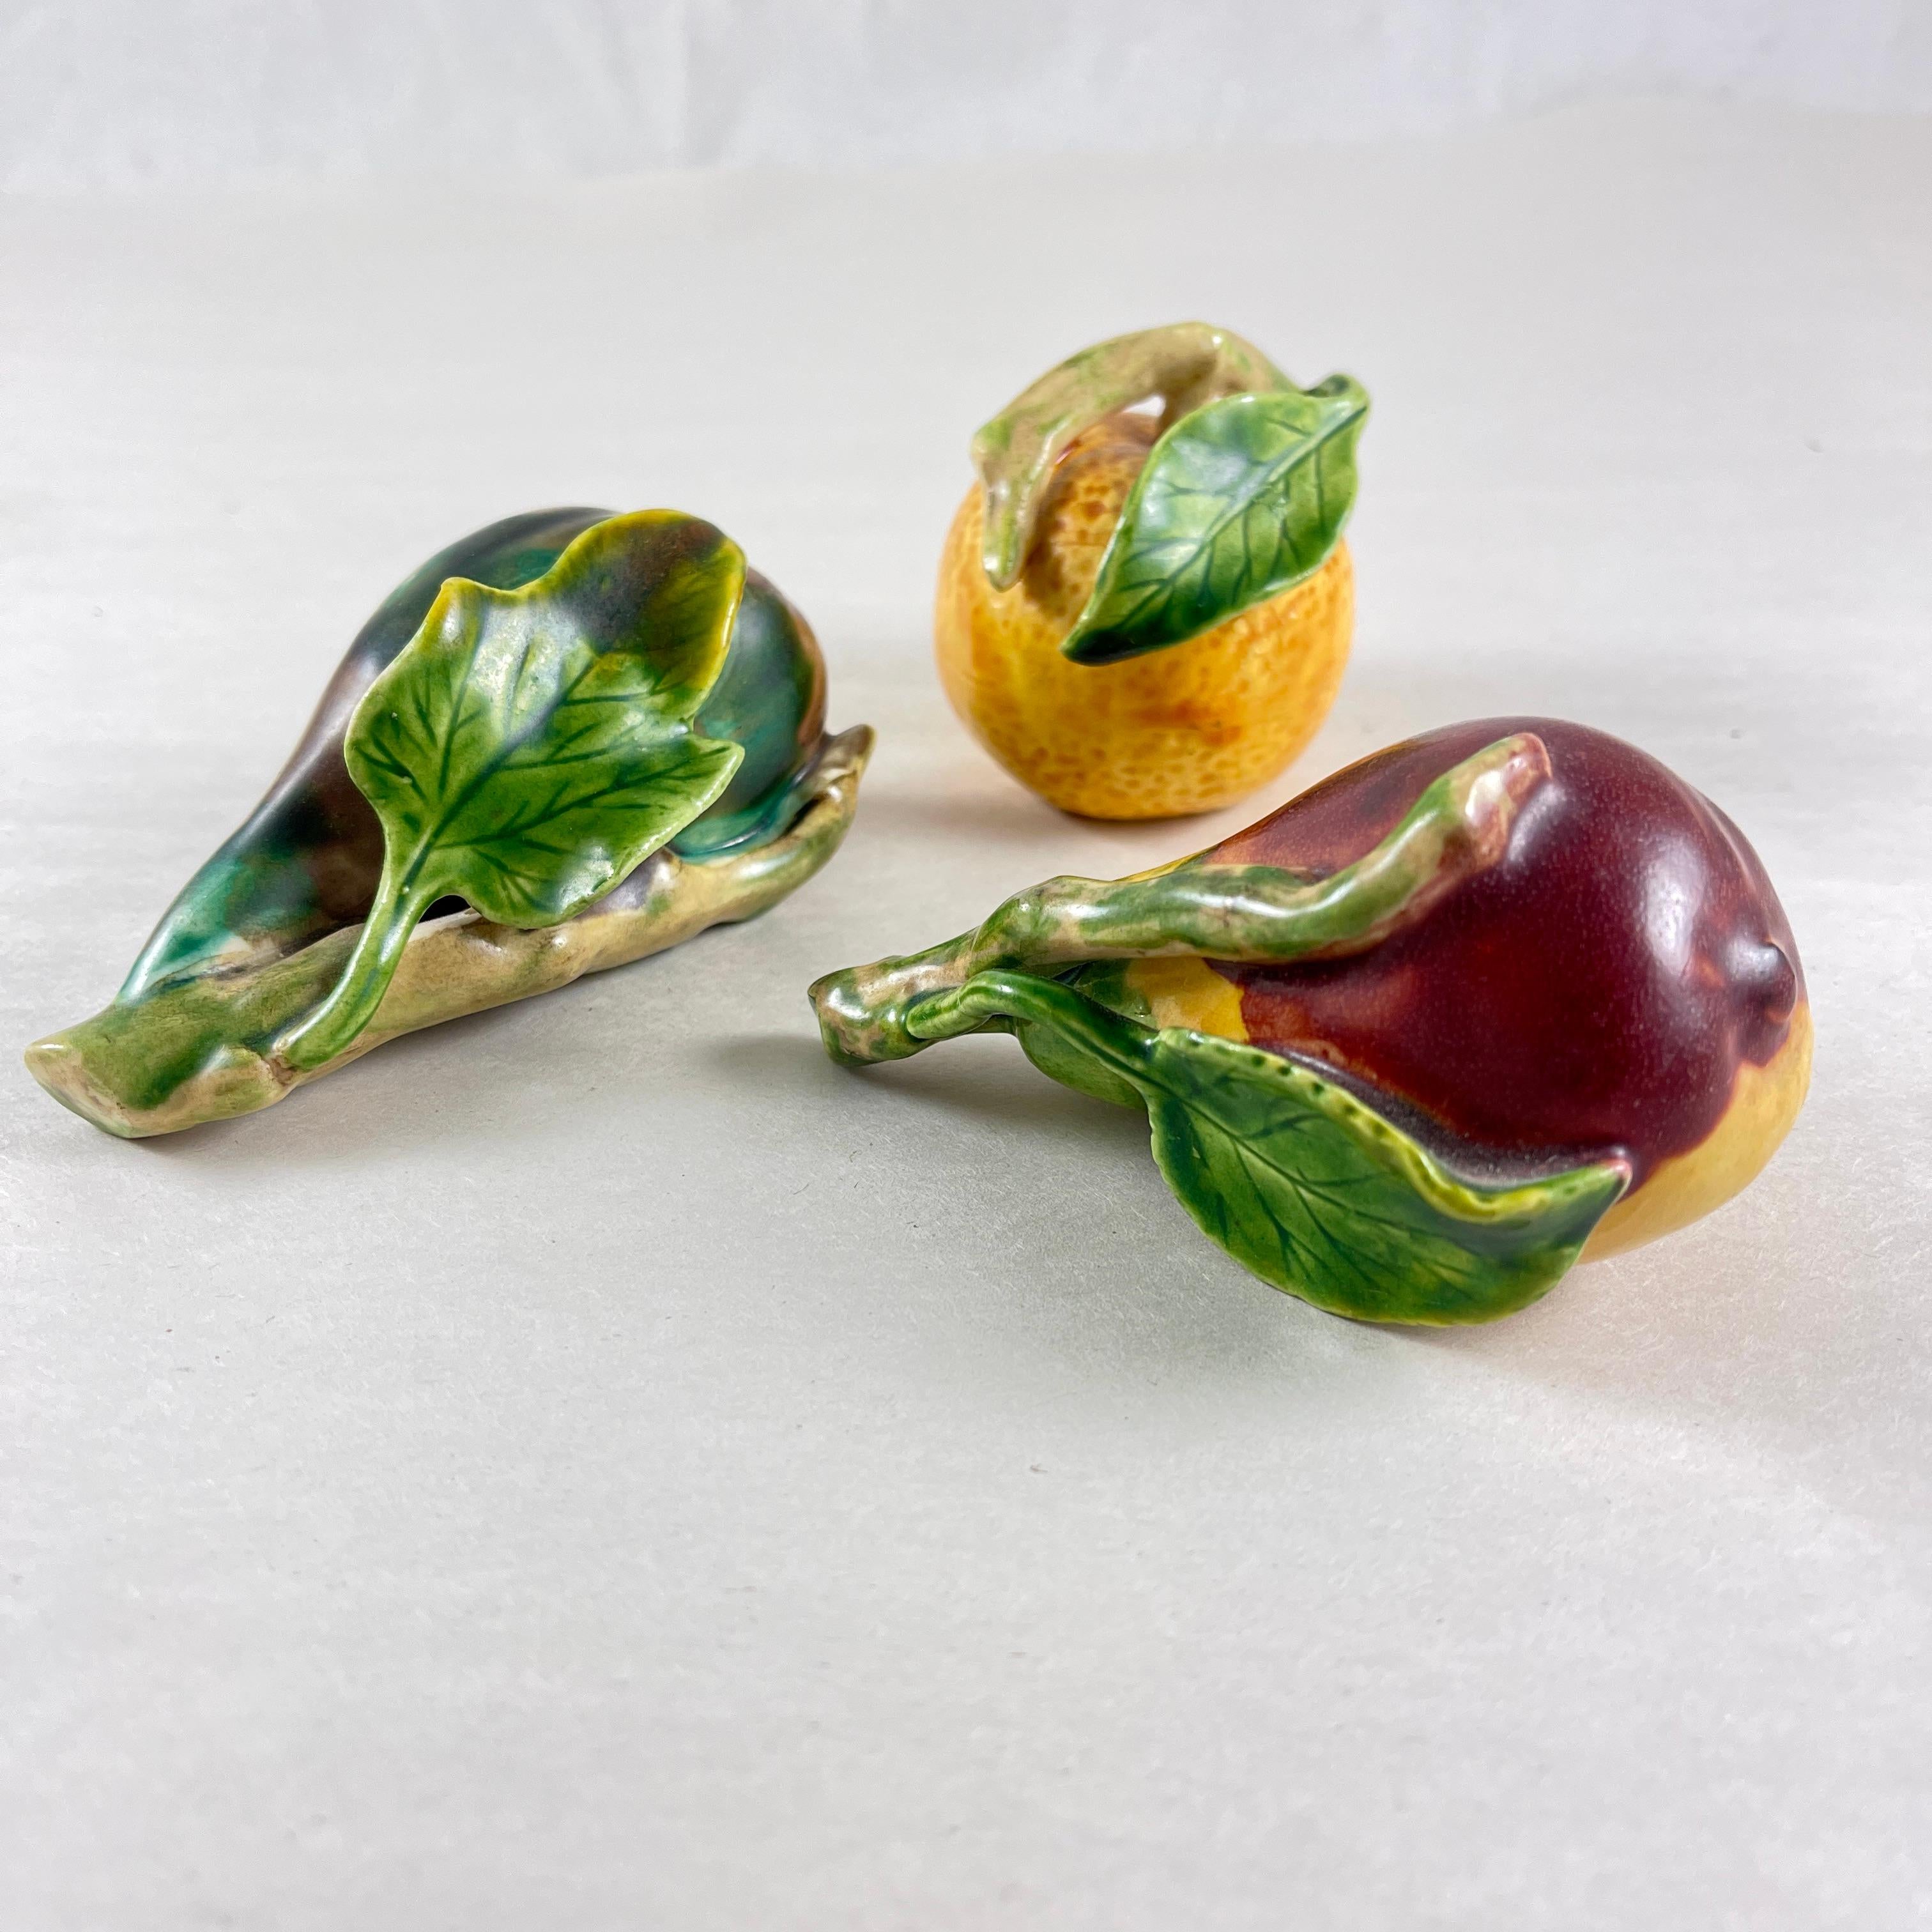 A set of three pieces of Chinese Altar Fruit, the Qing Period, China, circa late 19th to the early 20th Century.

The Qing dynasty, also called the Manchu dynasty, was the last of the imperial dynasties of China, spanning from 1644 to 1912.

The